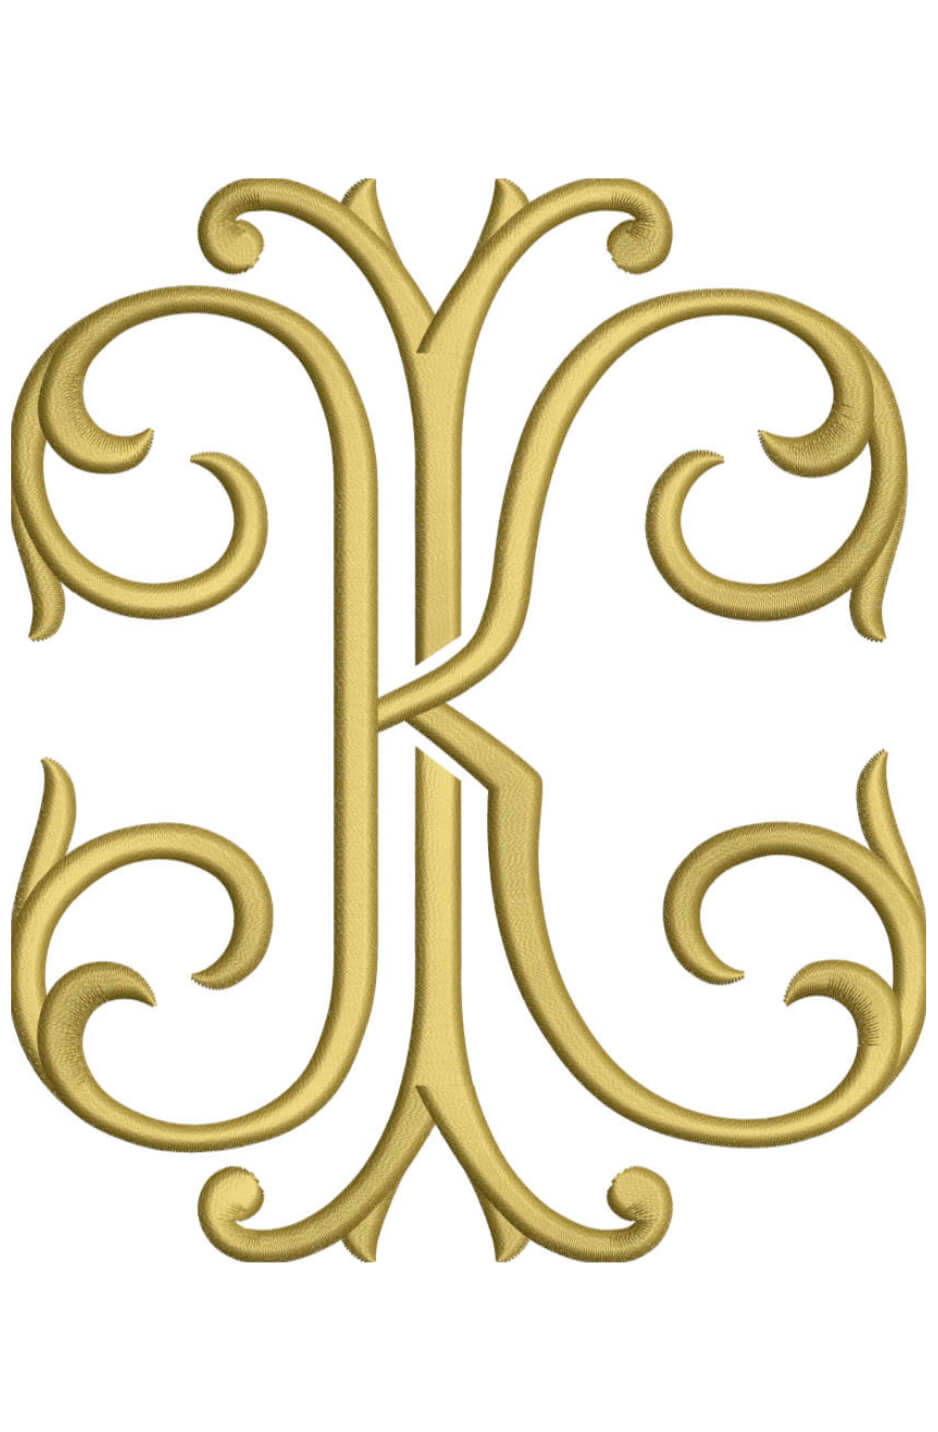 Monogram Couture IK for Embroidery